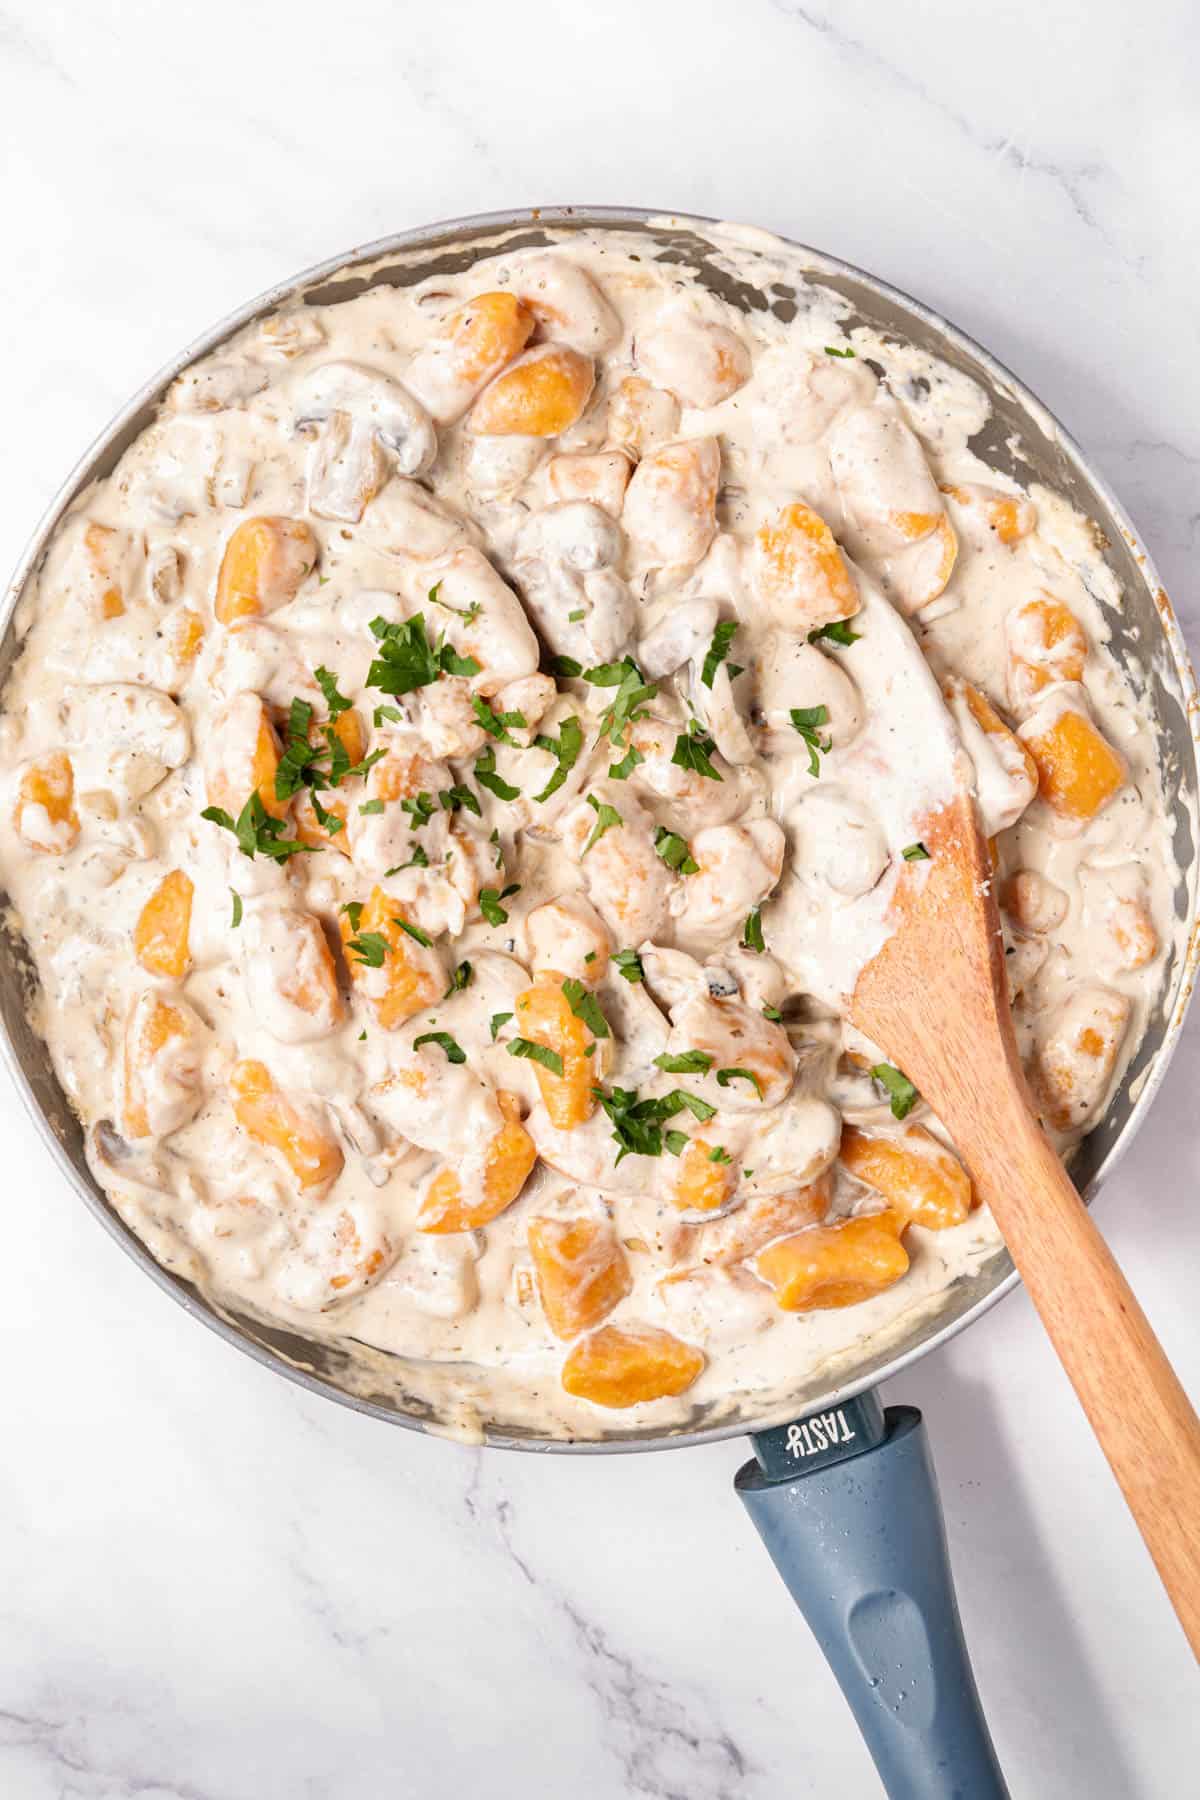 Finished sweet potato gnocchi in a large pan of creamy mushroom sauce.